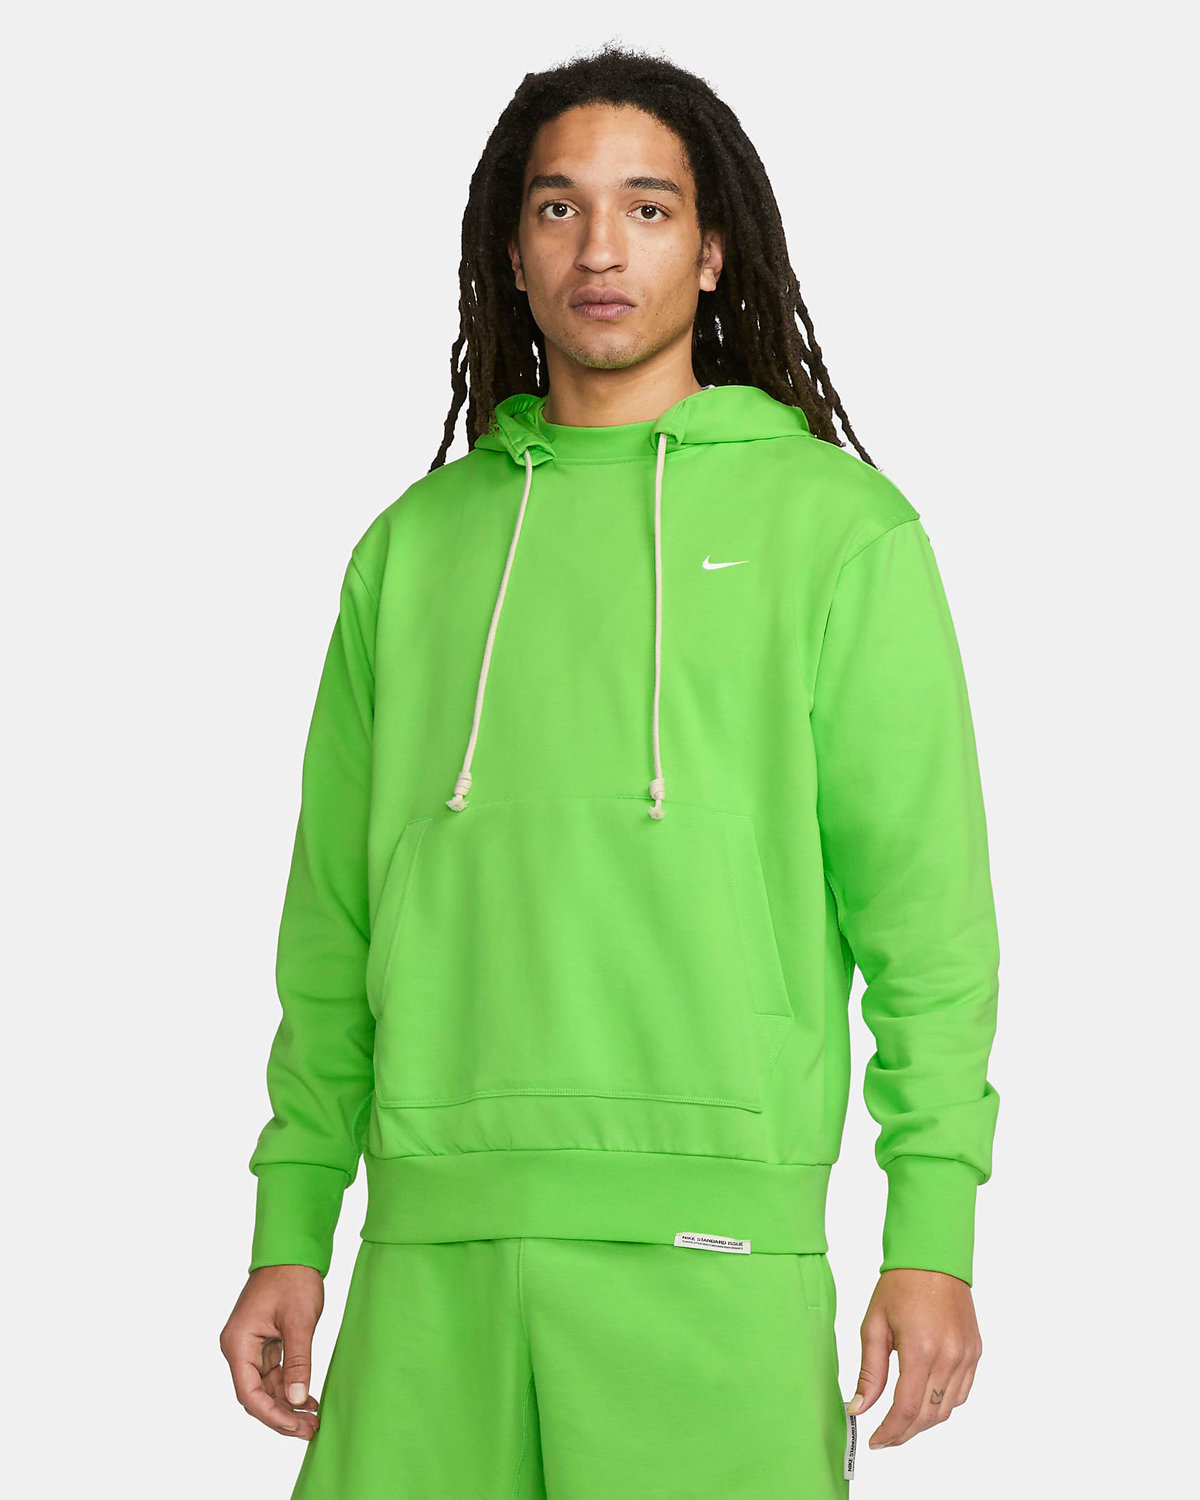 Nike-Standard-Issue-Basketball-Hoodie-Action-Green